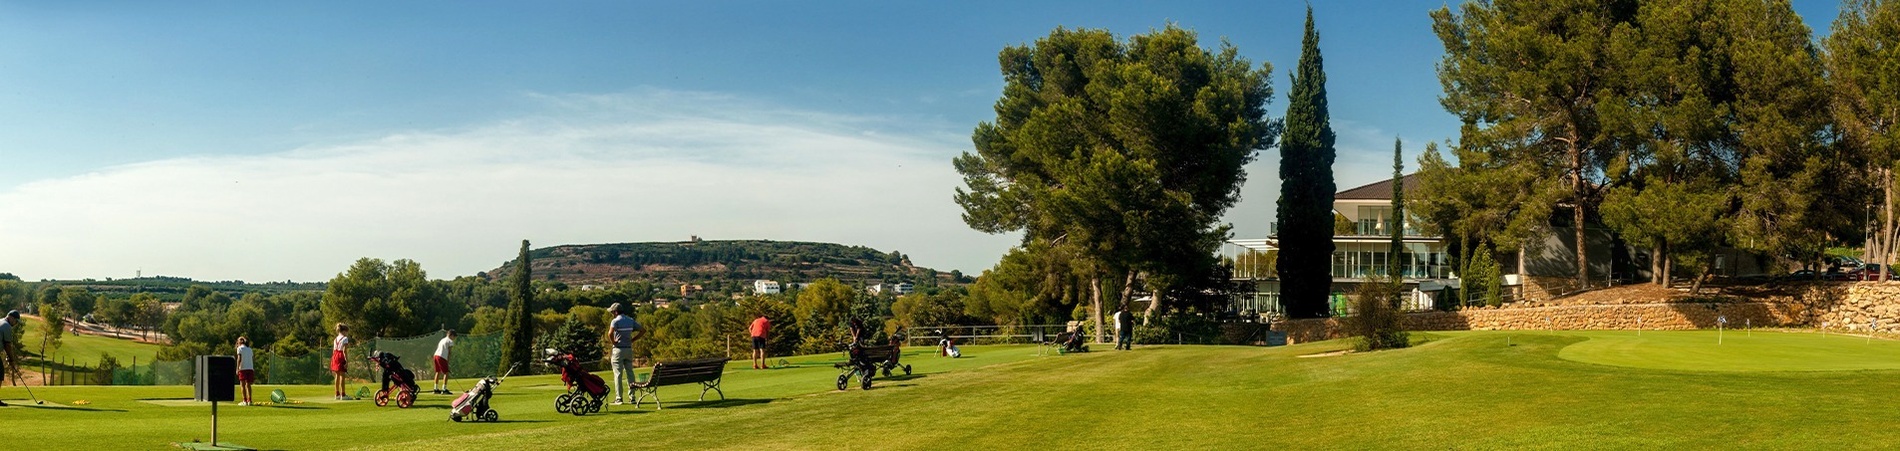 a group of people are playing golf on a lush green field